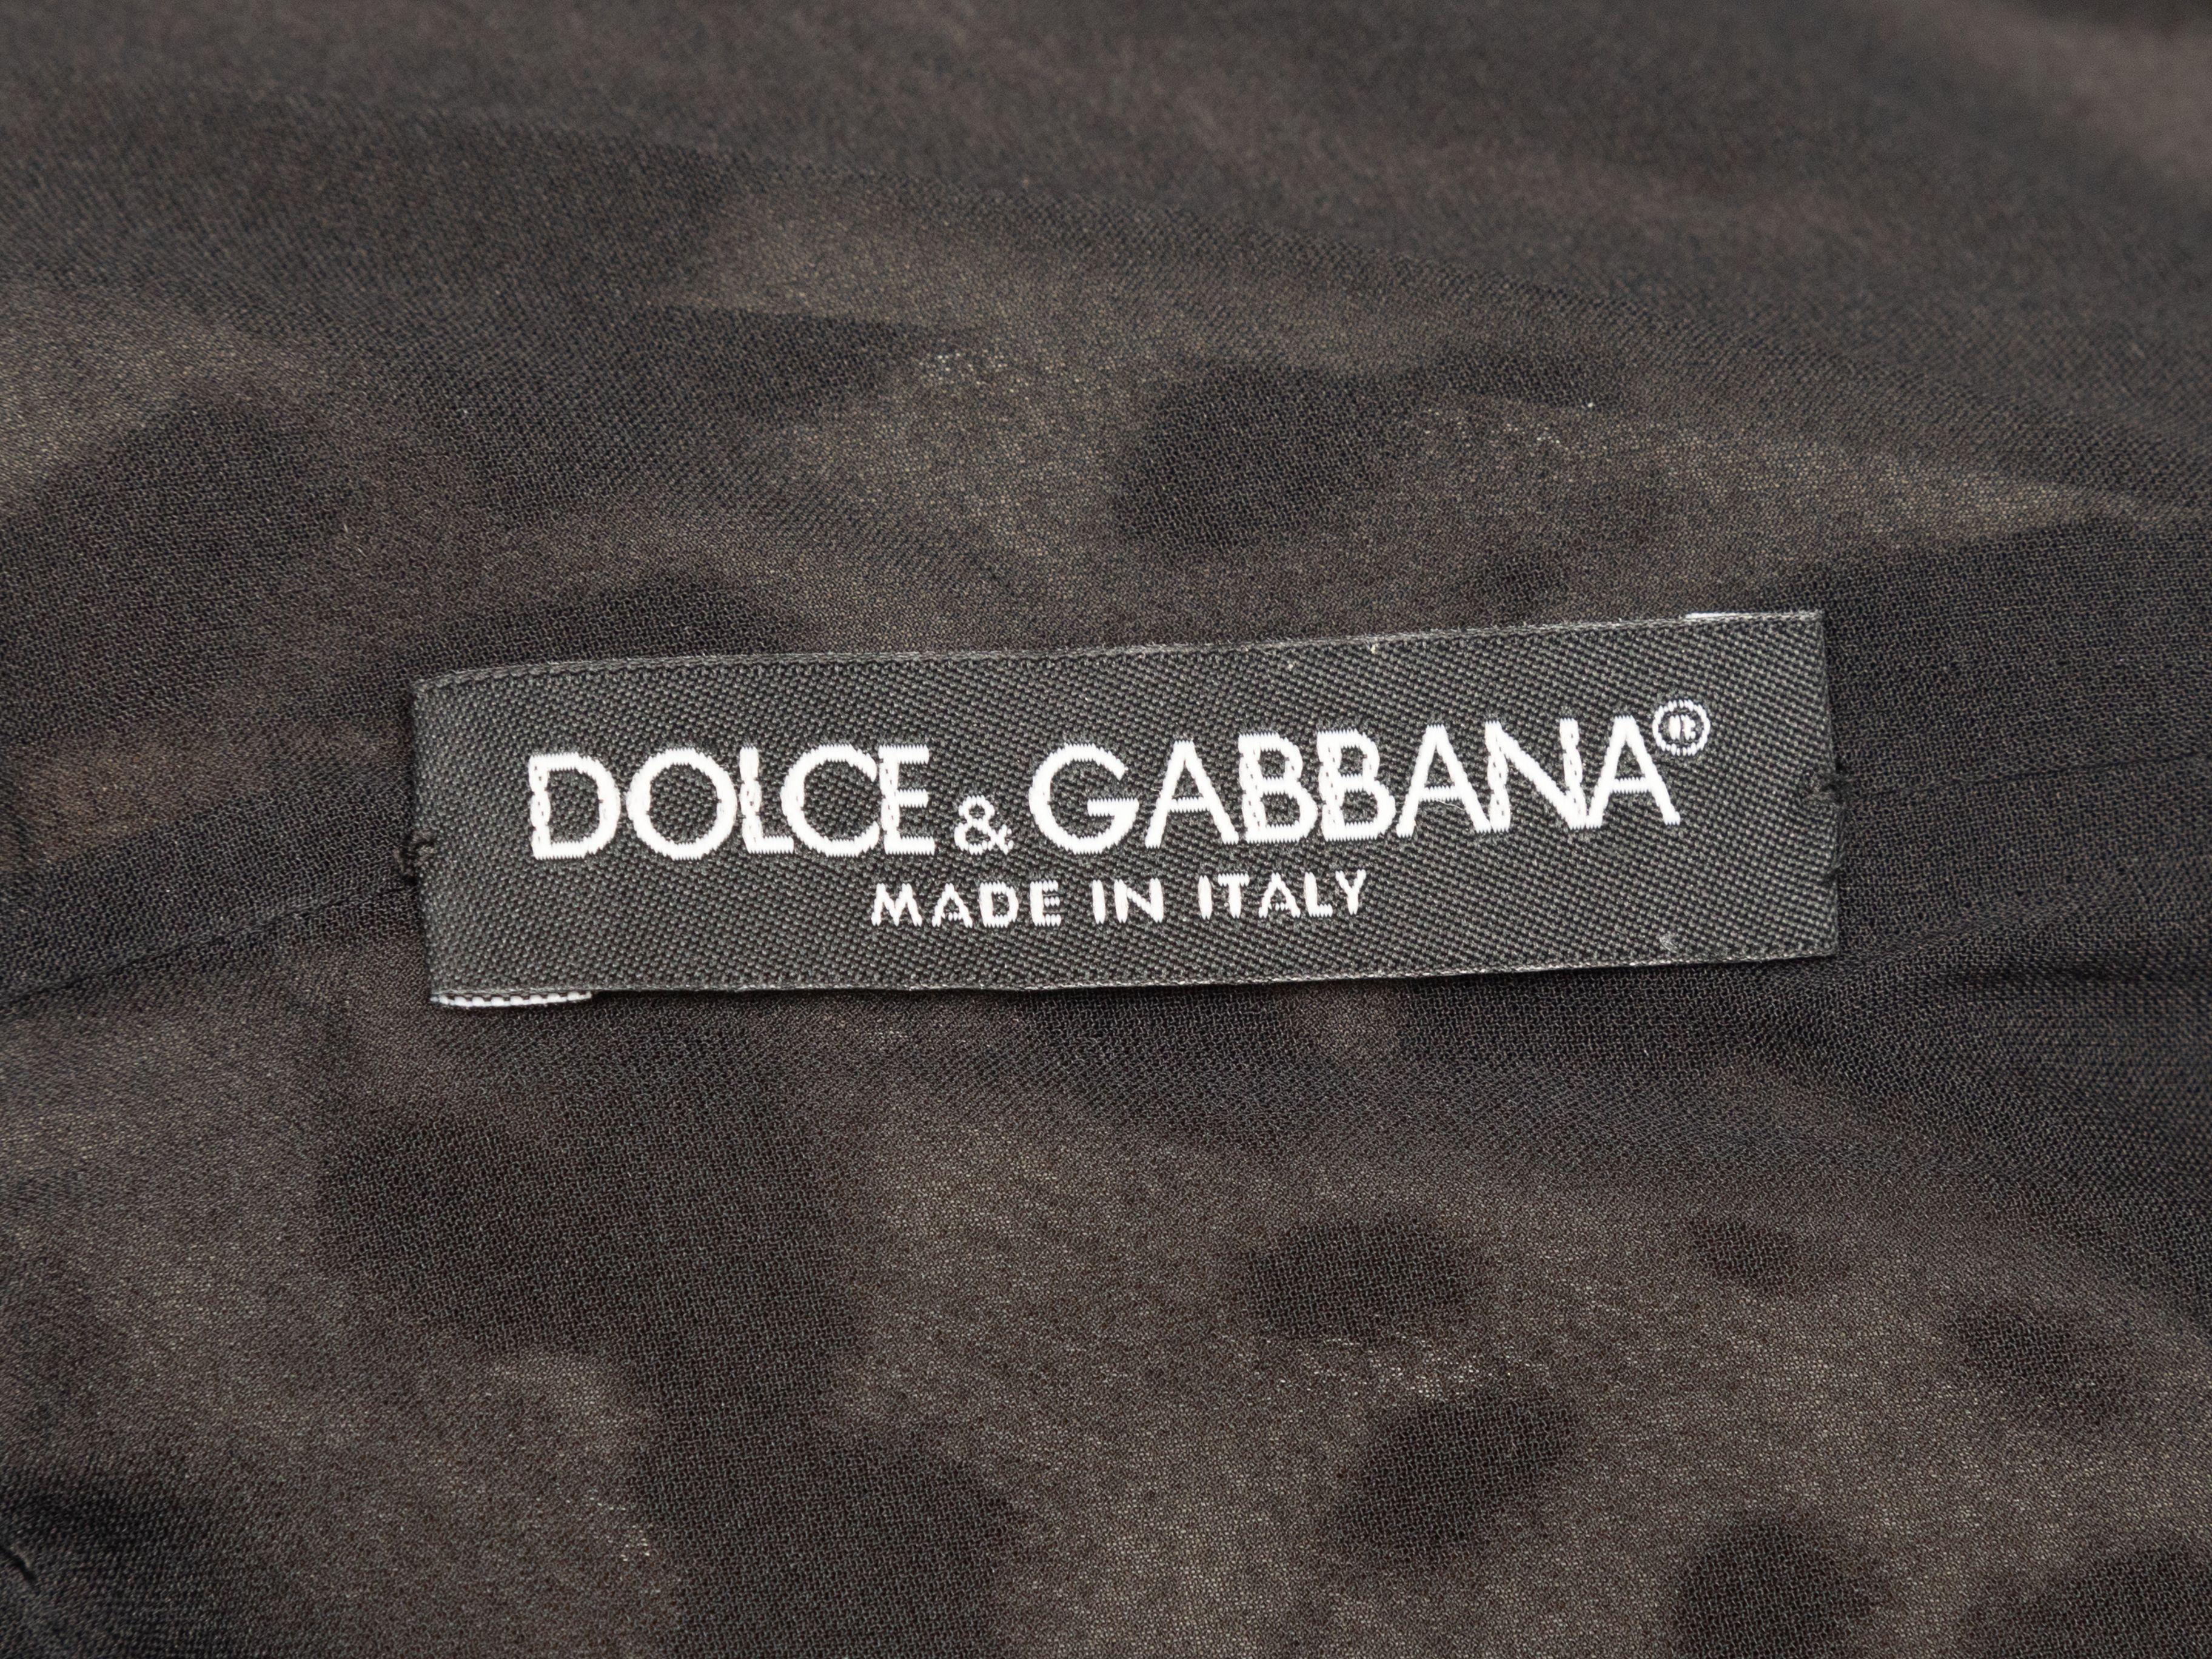 Product Details: Brown and black leopard print fitted knee-length dress by Dolce & Gabbana. Square neckline. Short sleeves. Zip closure at center back. 30